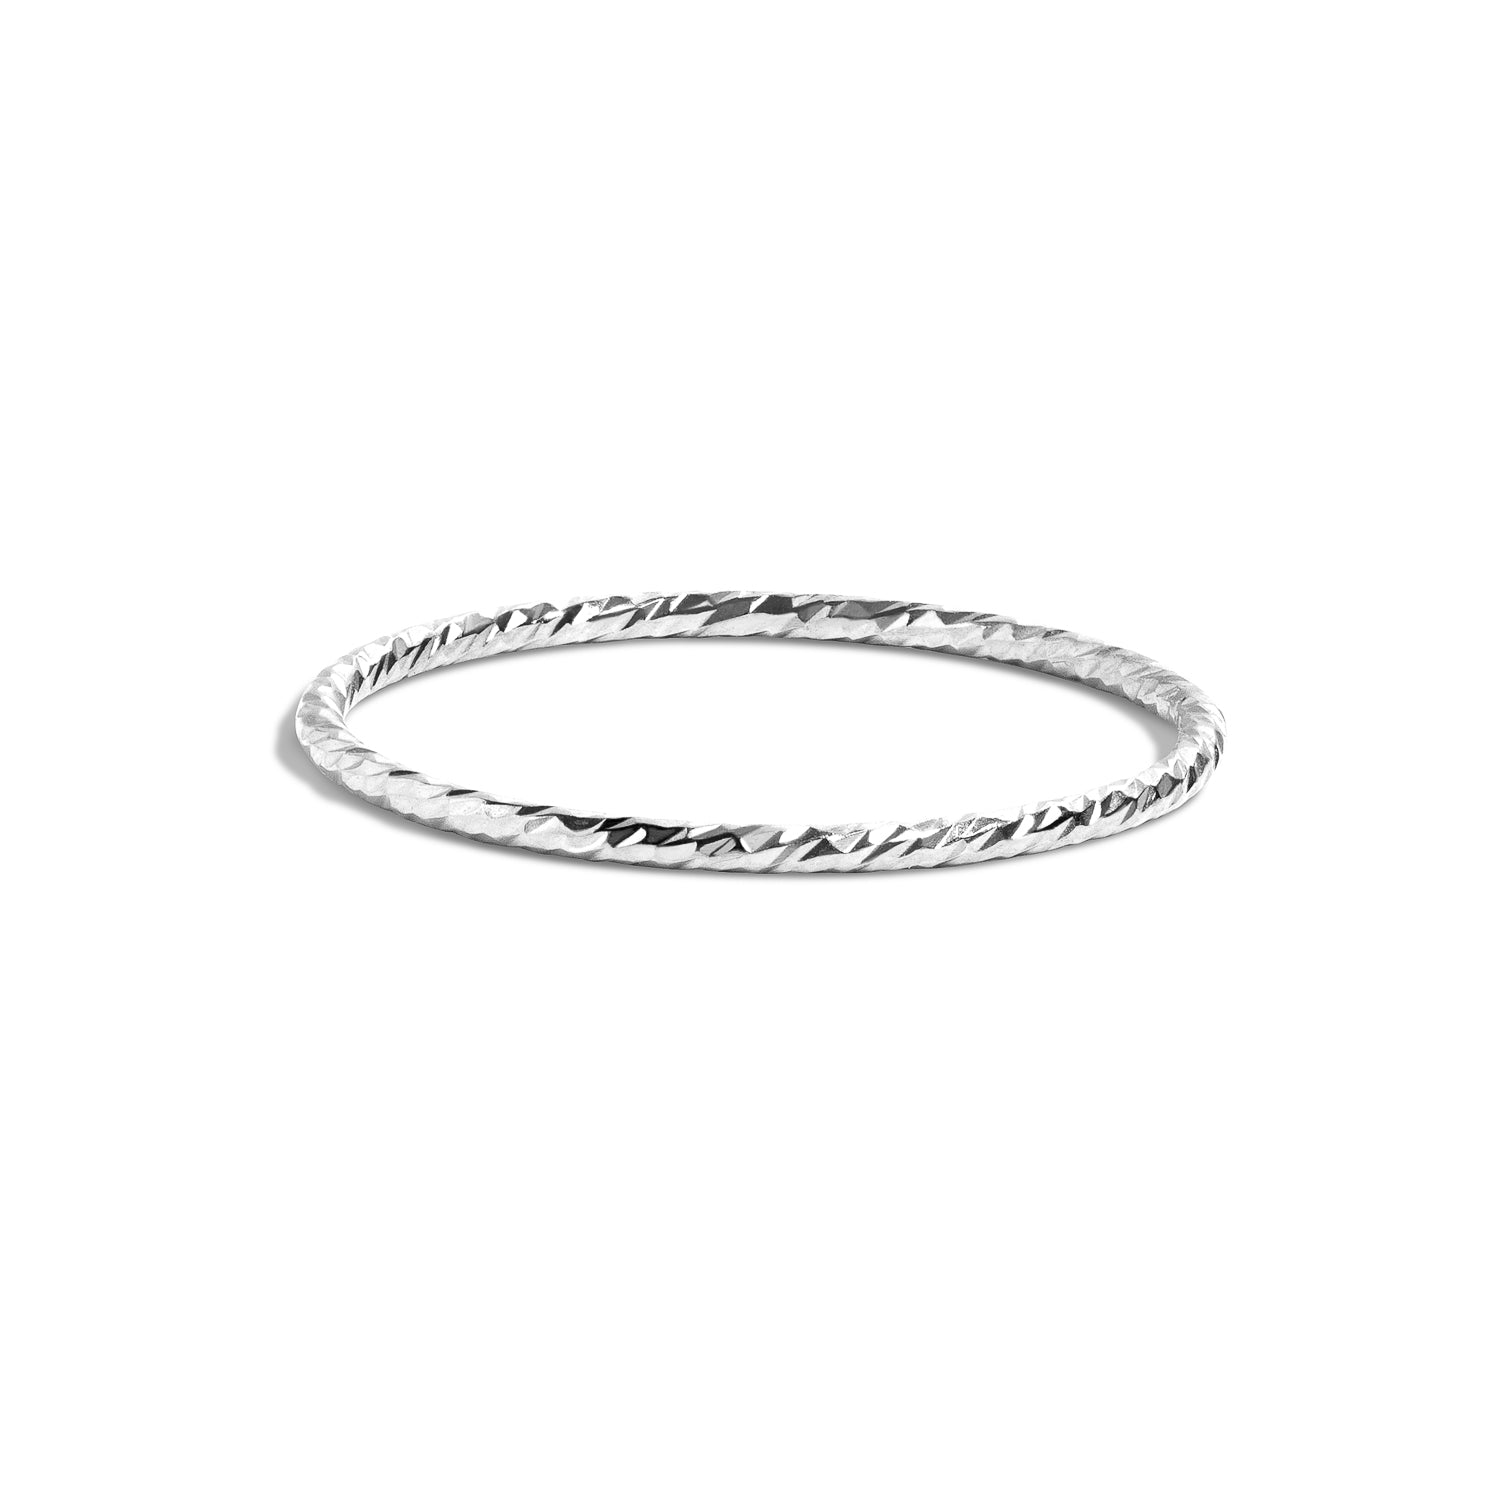 Shahla Karimi Jewelry Barely There Twisted Rope Band 14K White Gold